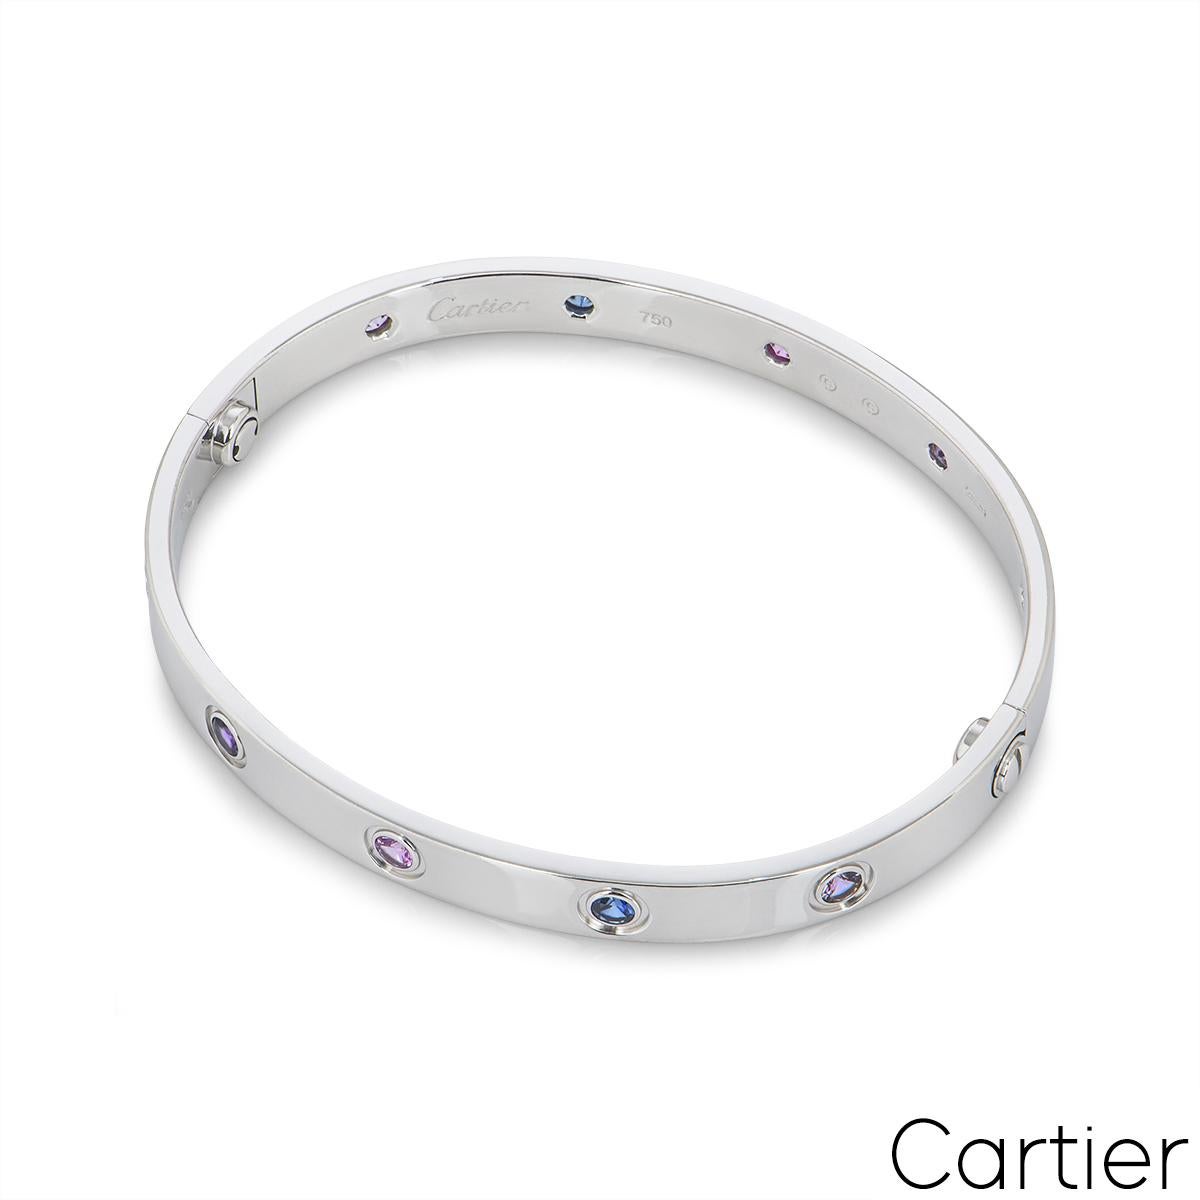 Cartier White Gold Coloured Stones Love Bracelet Size 17 B6036317 In Excellent Condition For Sale In London, GB